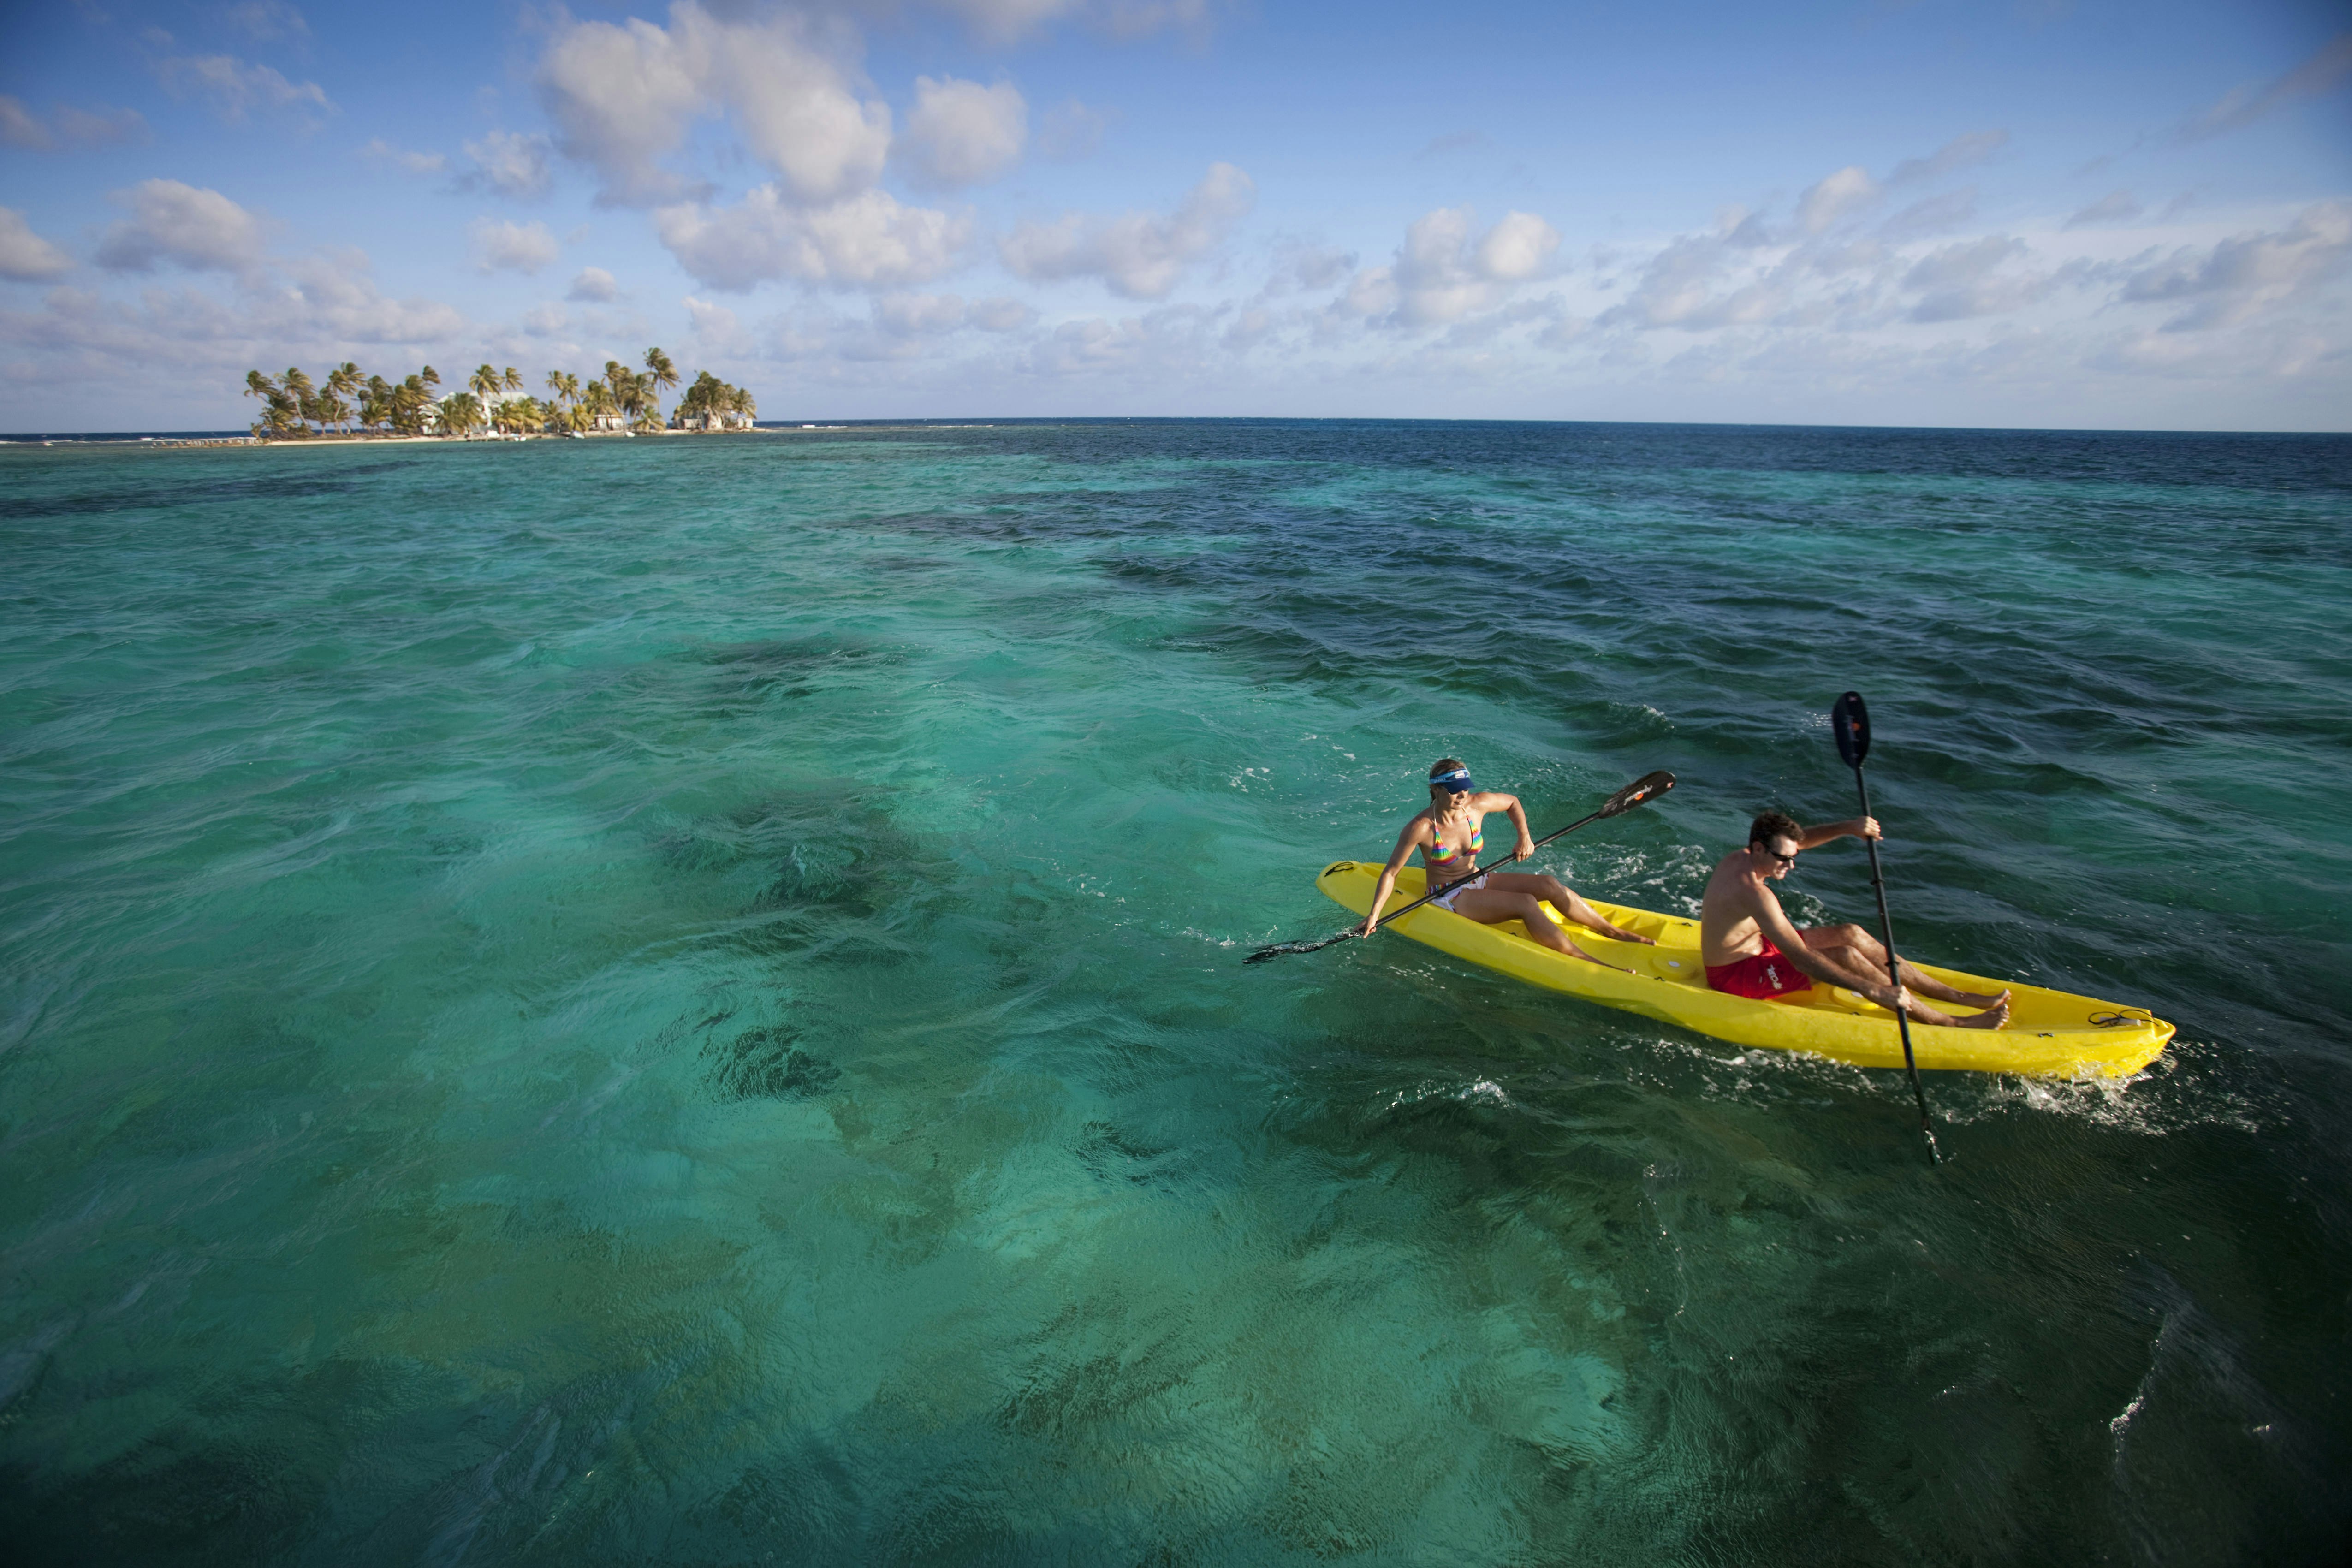 A couple paddling in a yellow kayak in vivid blue Caribbean water with a small tropical Island in the background.